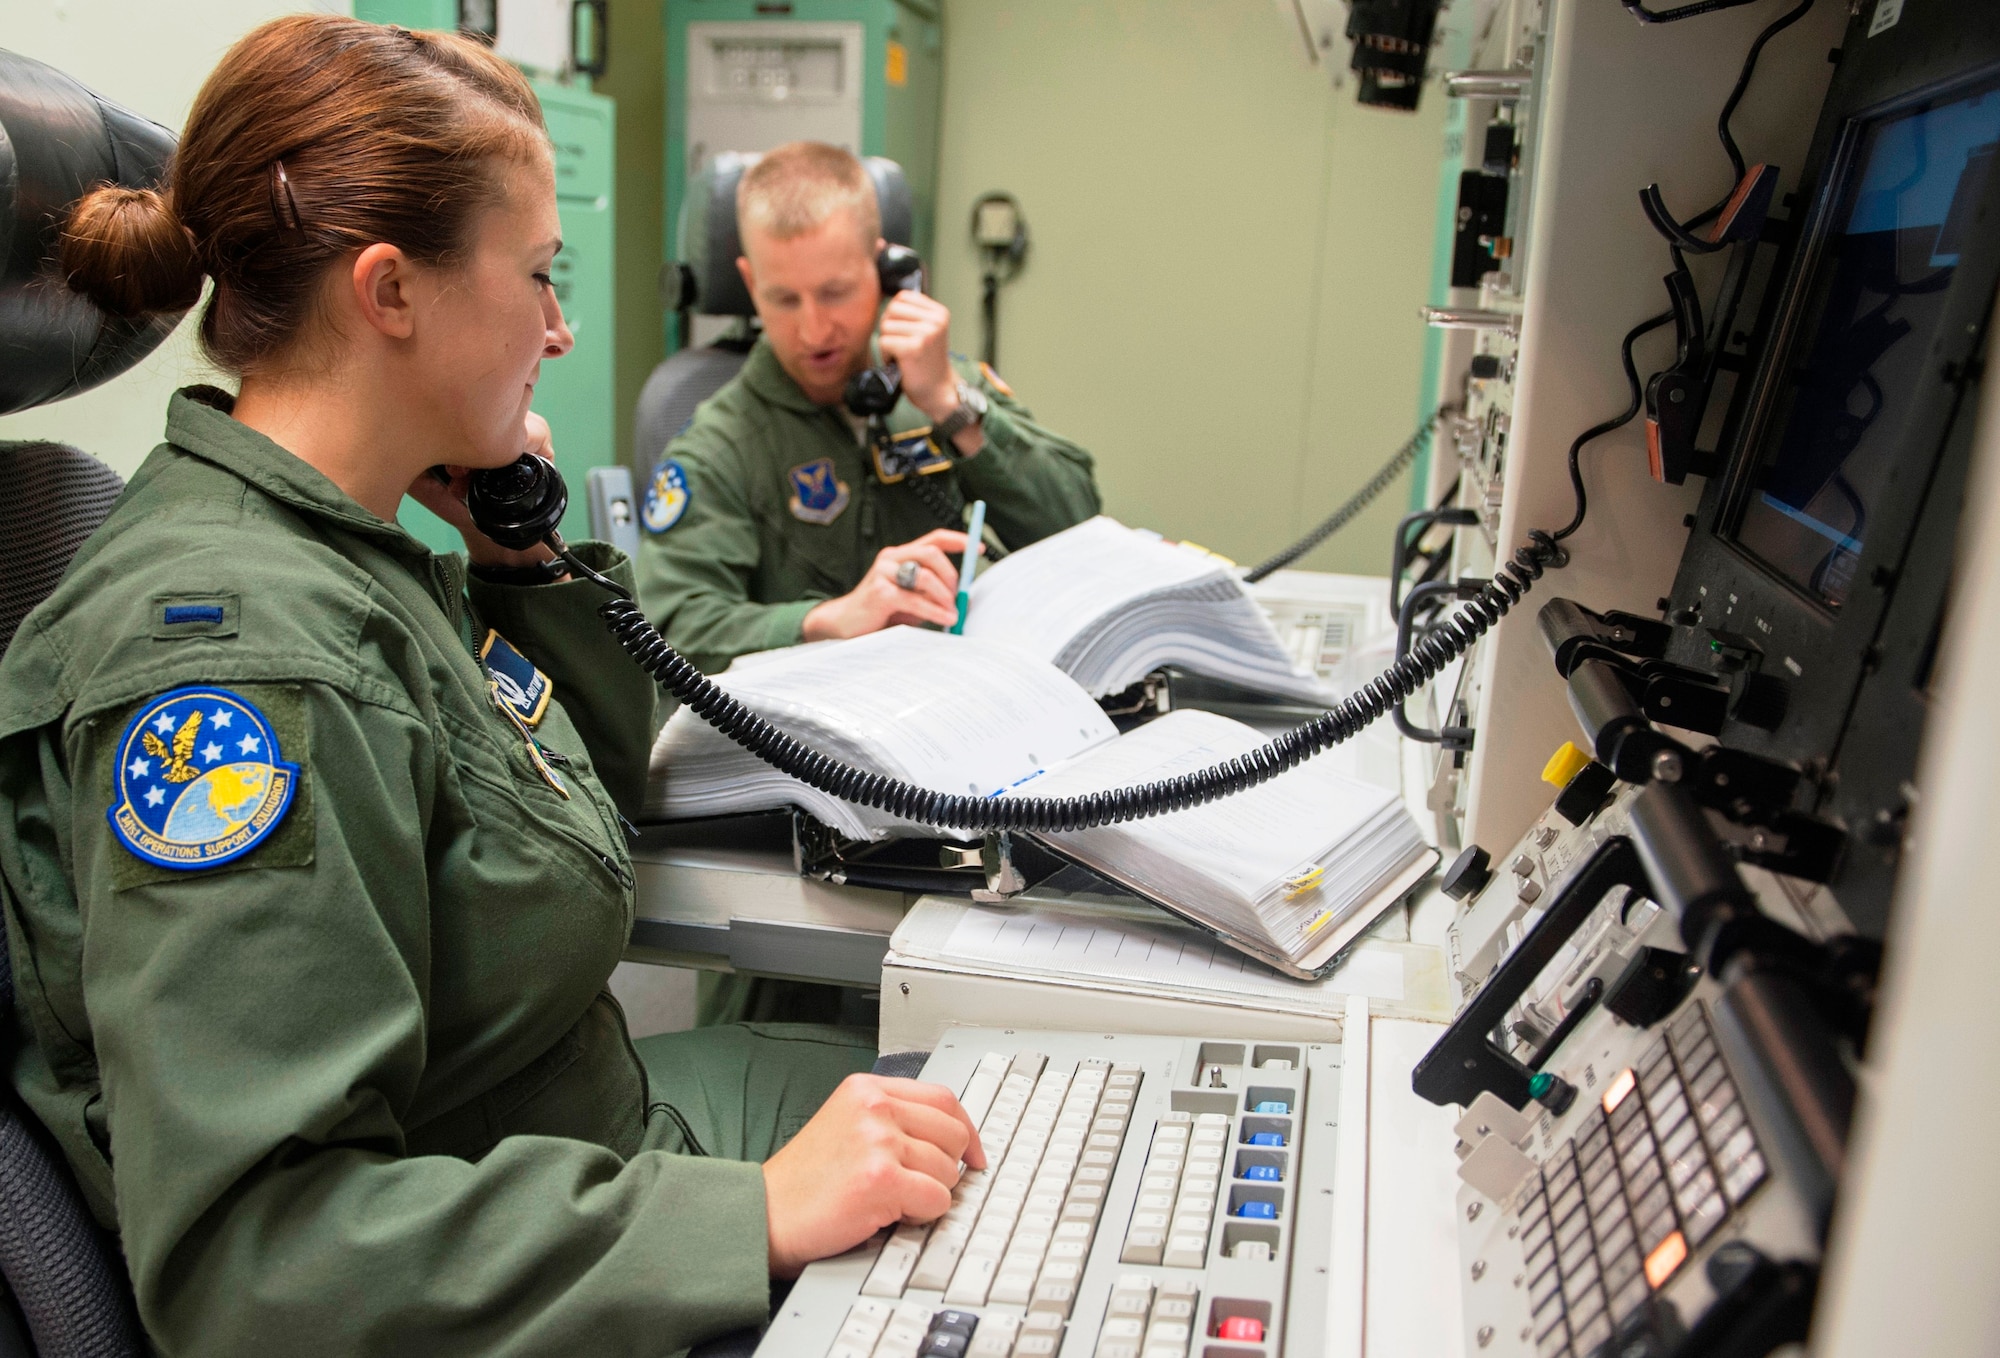 First Lt. Brittany Morton, left, and her missileer partner answer their phones during a trainer ride at the missile procedures trainer. Two missileers man a launch control center together and take turns sleeping so that one person is watching the LFs at all times. Morton is a 490th Missile Squadron missile combat crew commander. (U.S. Air Force photo/Beau Wade)